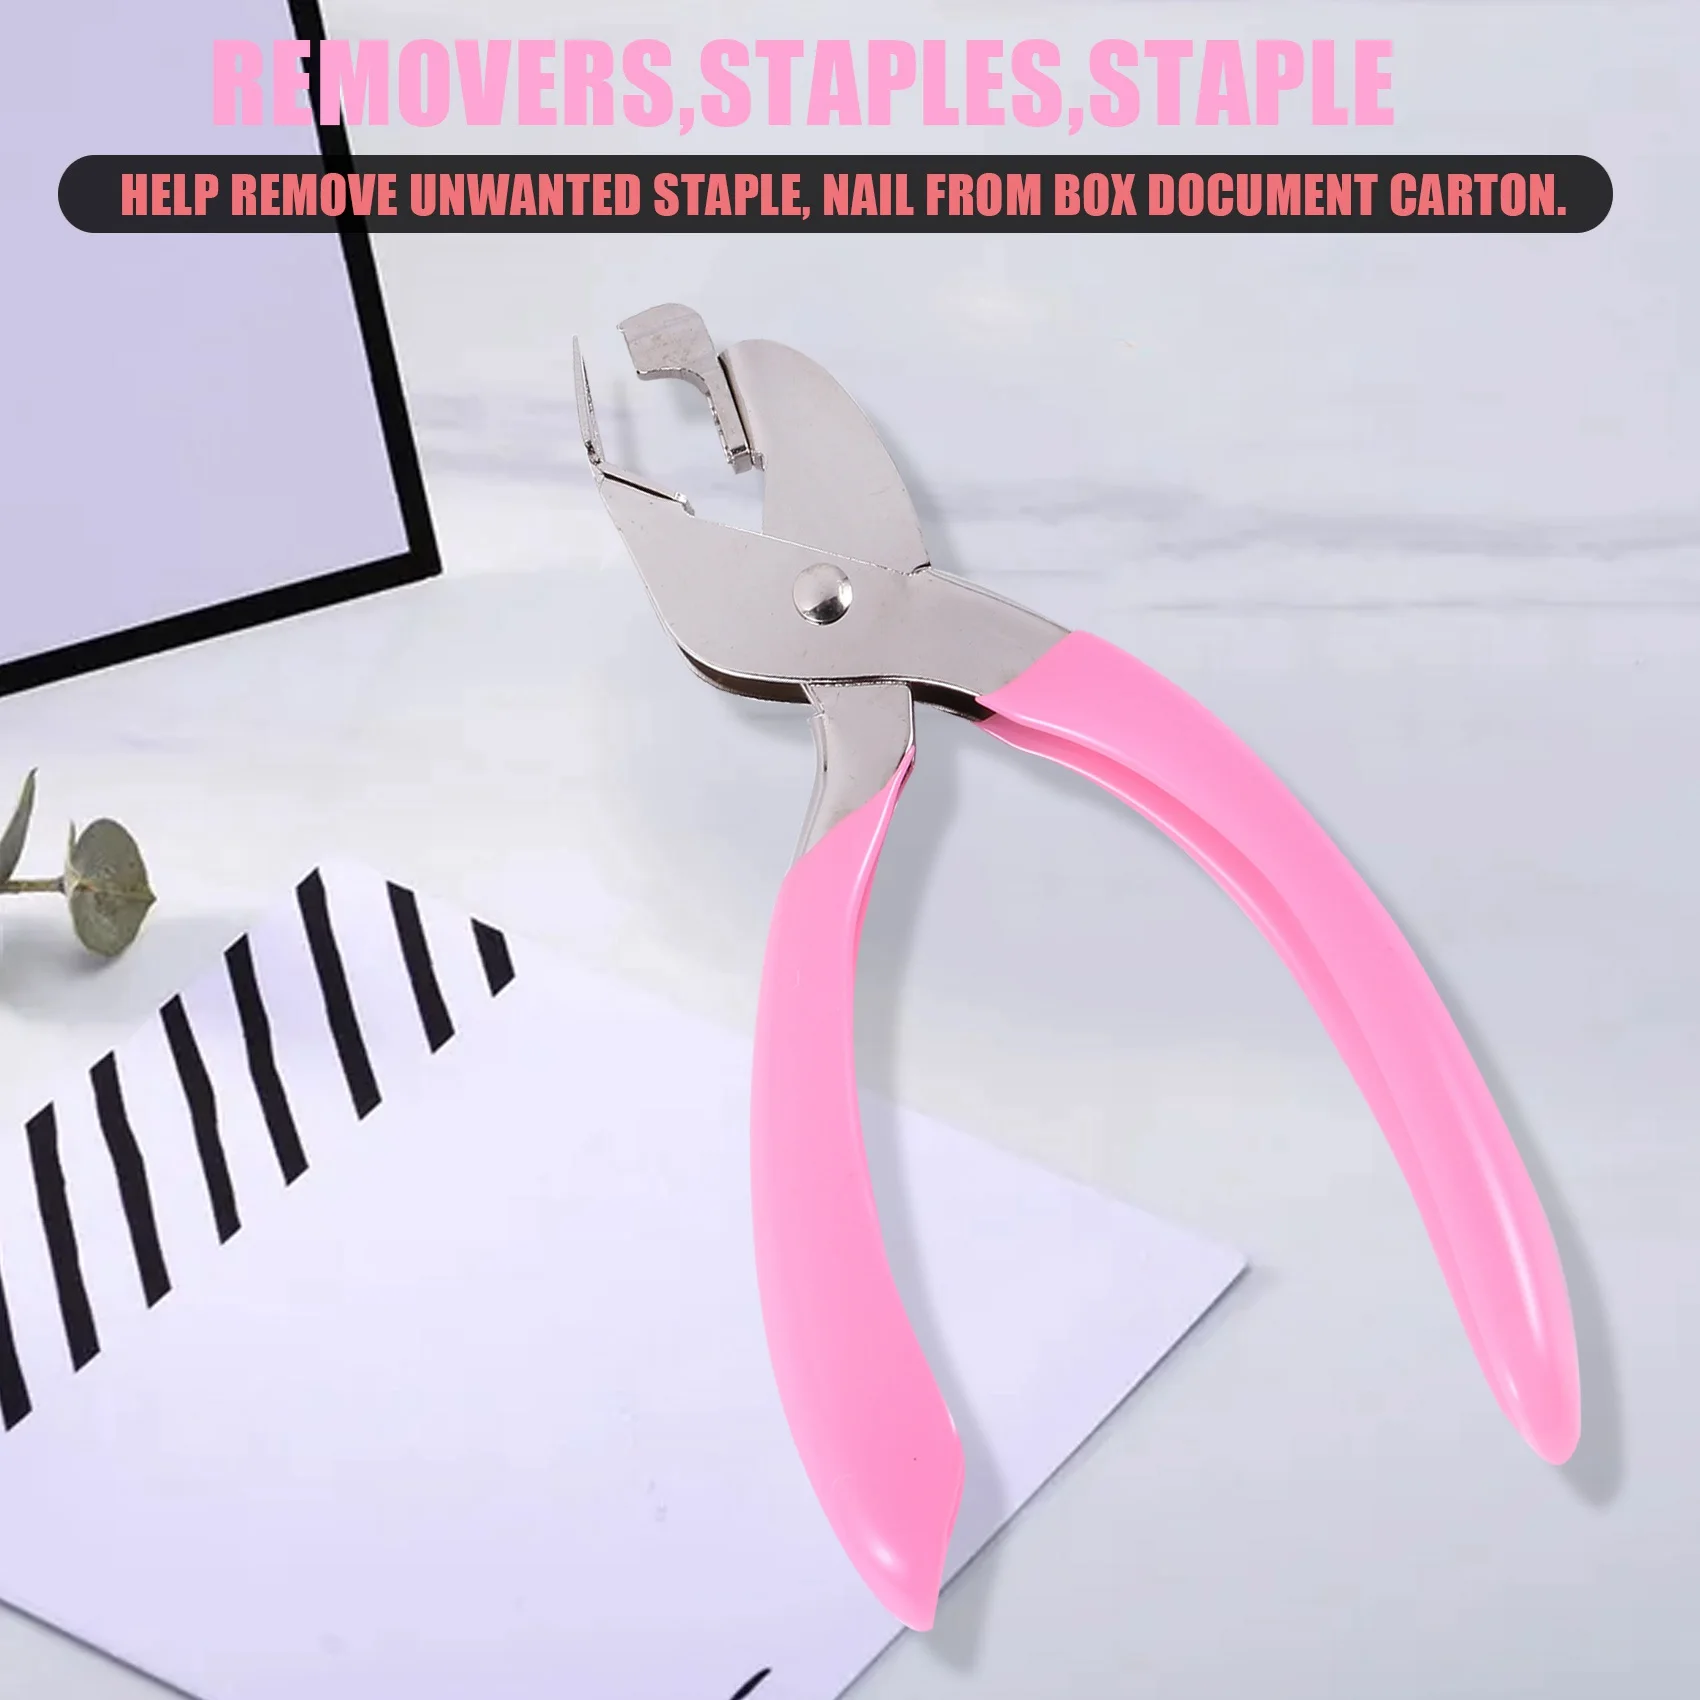 

Handheld Staple Remover Lifter Opener Spring-loaded Staple Puller for Office School Home Use (Pink)